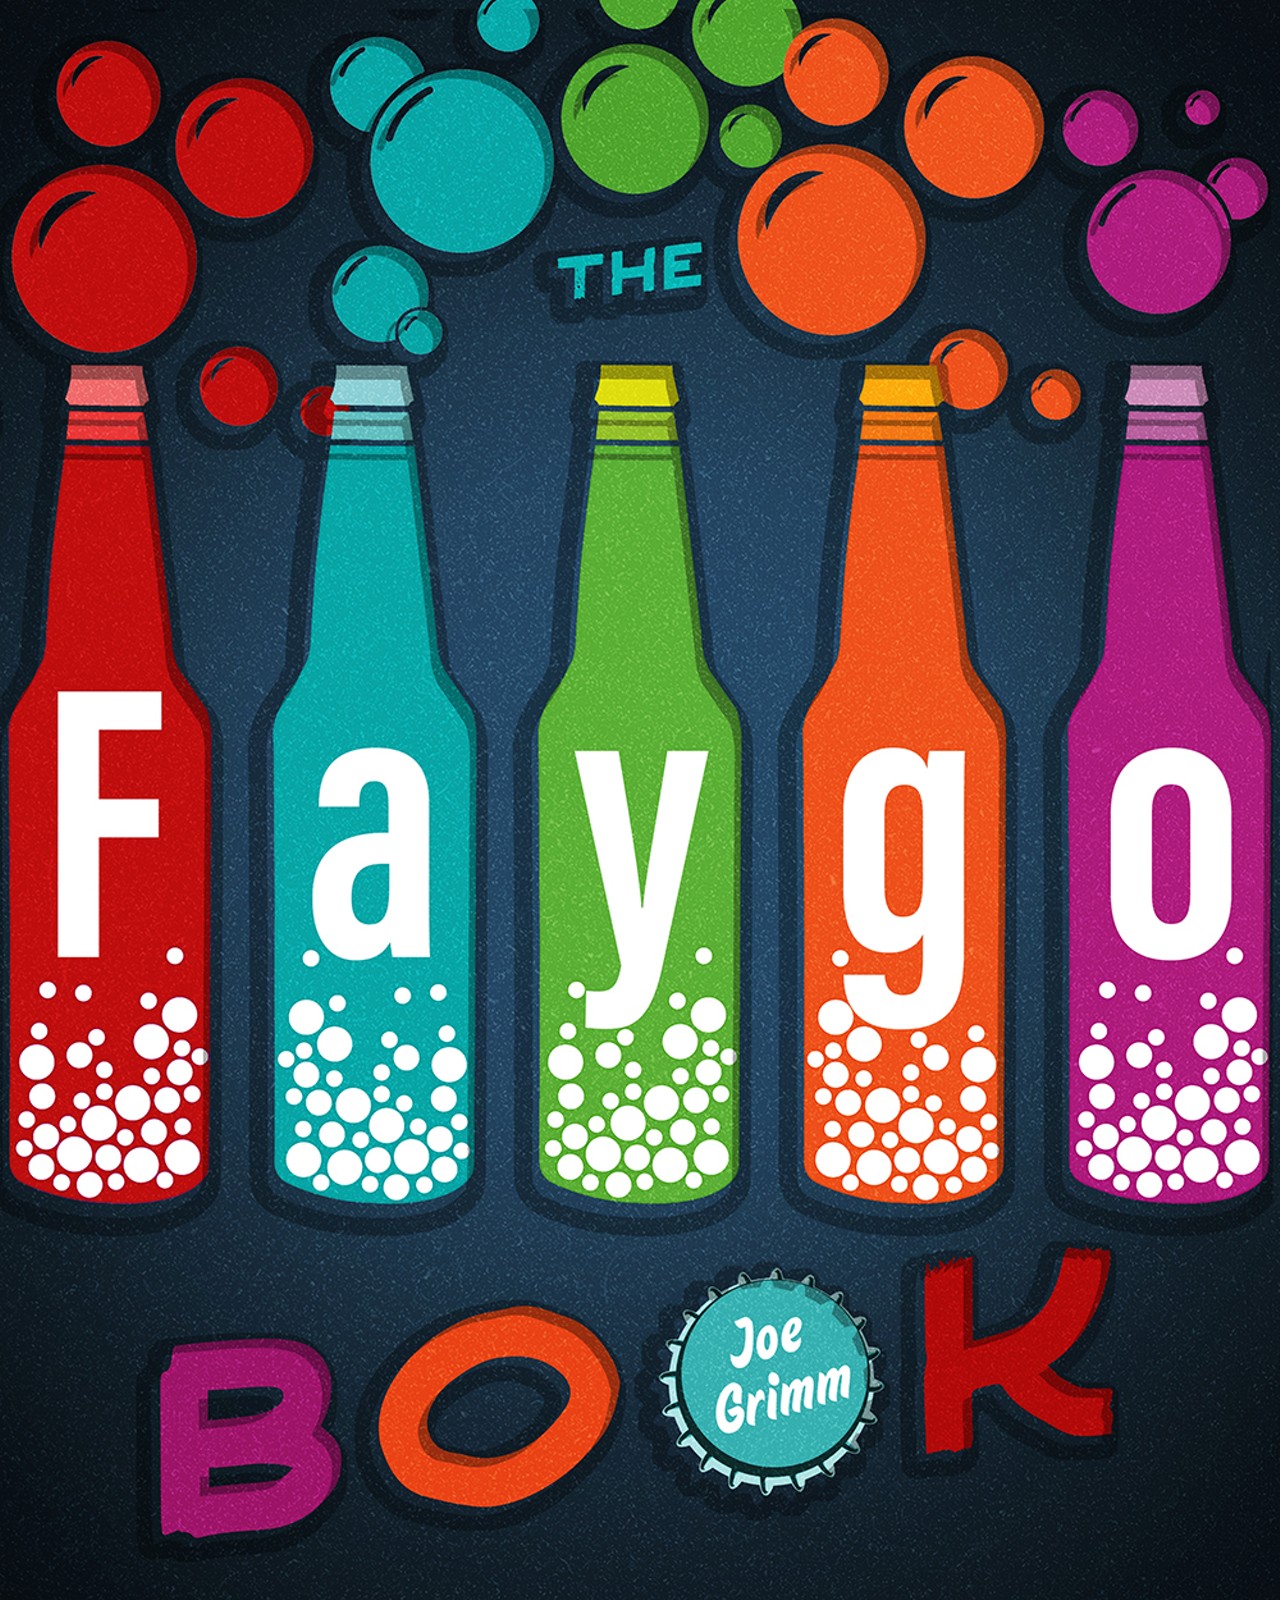 The Faygo Book
As the name suggests, The Faygo Book tells the story of Detroit&#146;s beloved pop &#151; yes, &#147;pop,&#148; not &#147;soda&#148; &#151; brand. The author, Michigan State University journalism professor Joe Grimm, has become an expert in Detroit food over the years, also authoring the 2012 book Coney Detroit. Published by Wayne State University Press, The Faygo Book tells the story of Ben and Perry Feigenson, Russian immigrants who created what would become a more-than-100-year-old brand. Through innovation, adaption, and a fiercely loyal fan base (we see you, Juggalos!), Faygo has become the last man standing in what used to be called &#147;pop alley.&#148; Grimm explains why and how the brand has become such a beloved symbol of the city. Whoop-whoop!